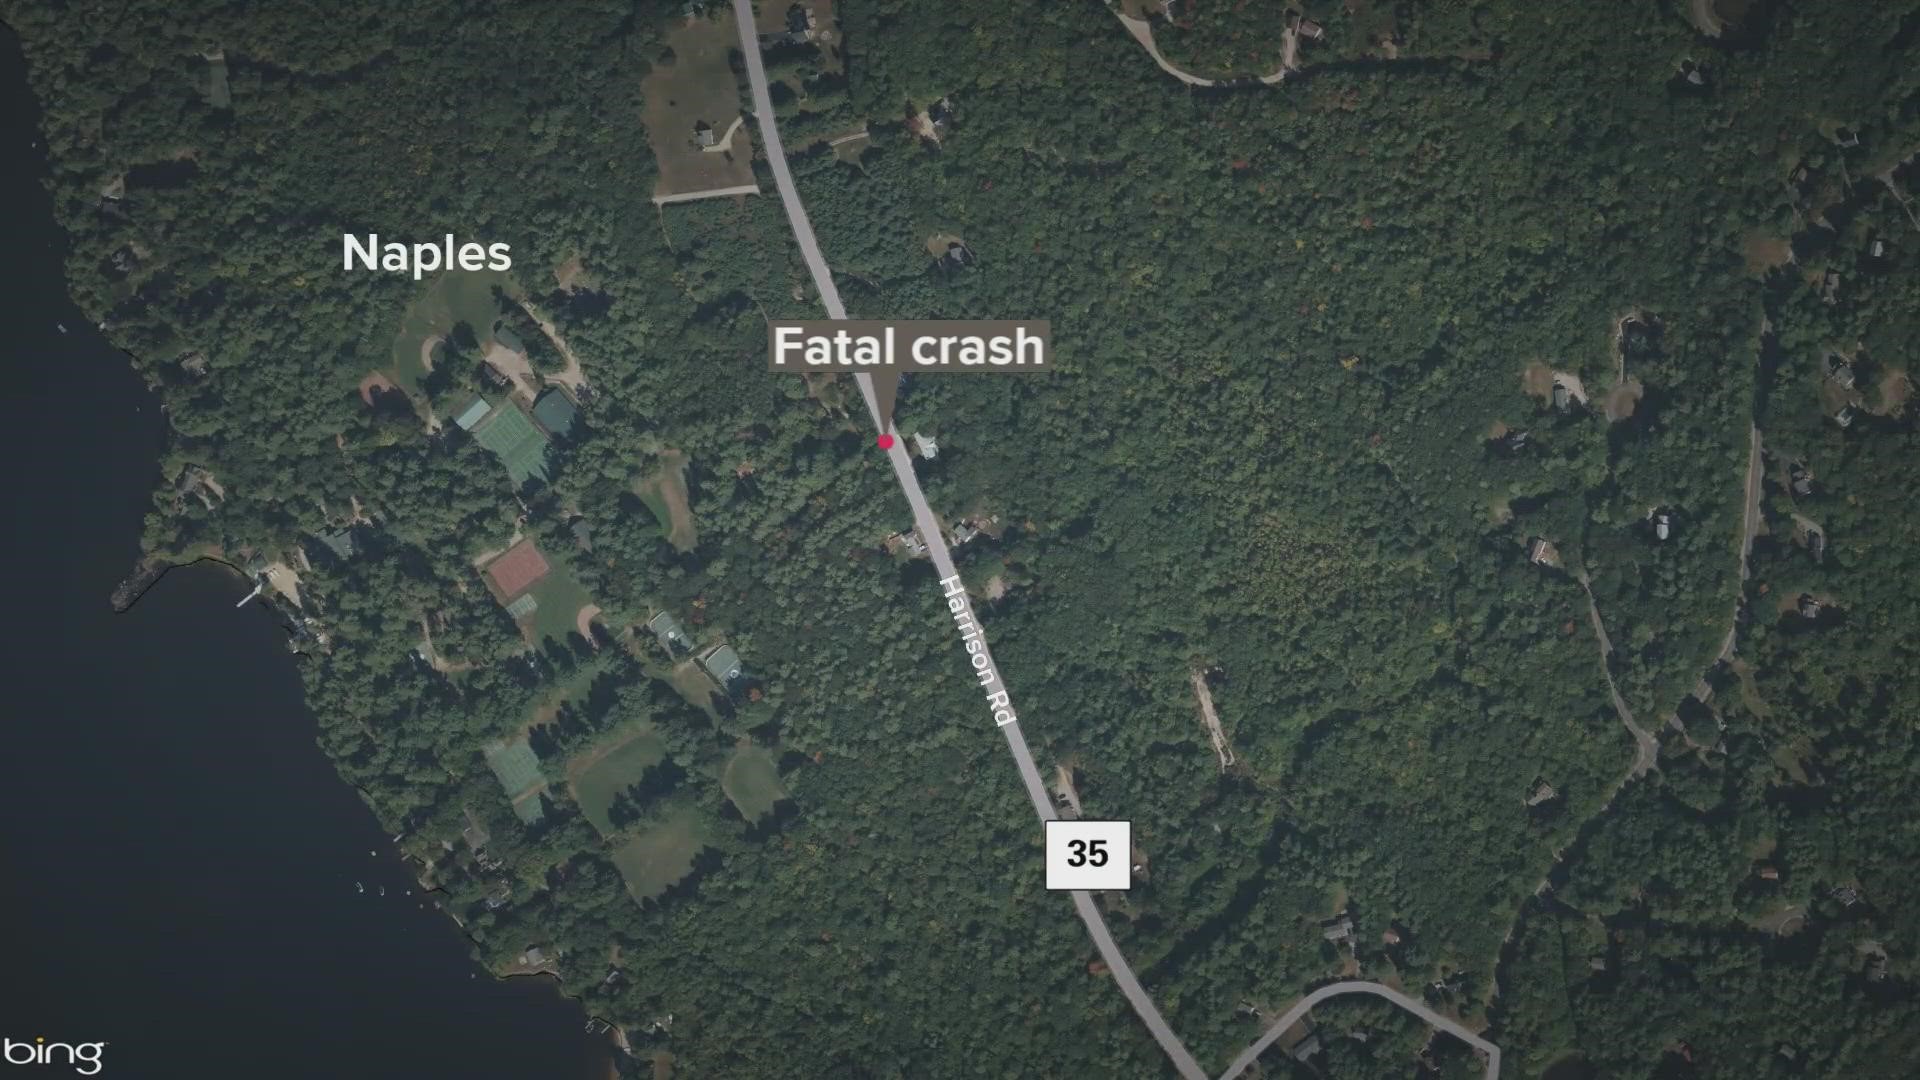 Donald Wallace, 48, of Raymond, was pronounced dead at the scene after he was struck by a car on Harrison Road in Naples, deputies said.